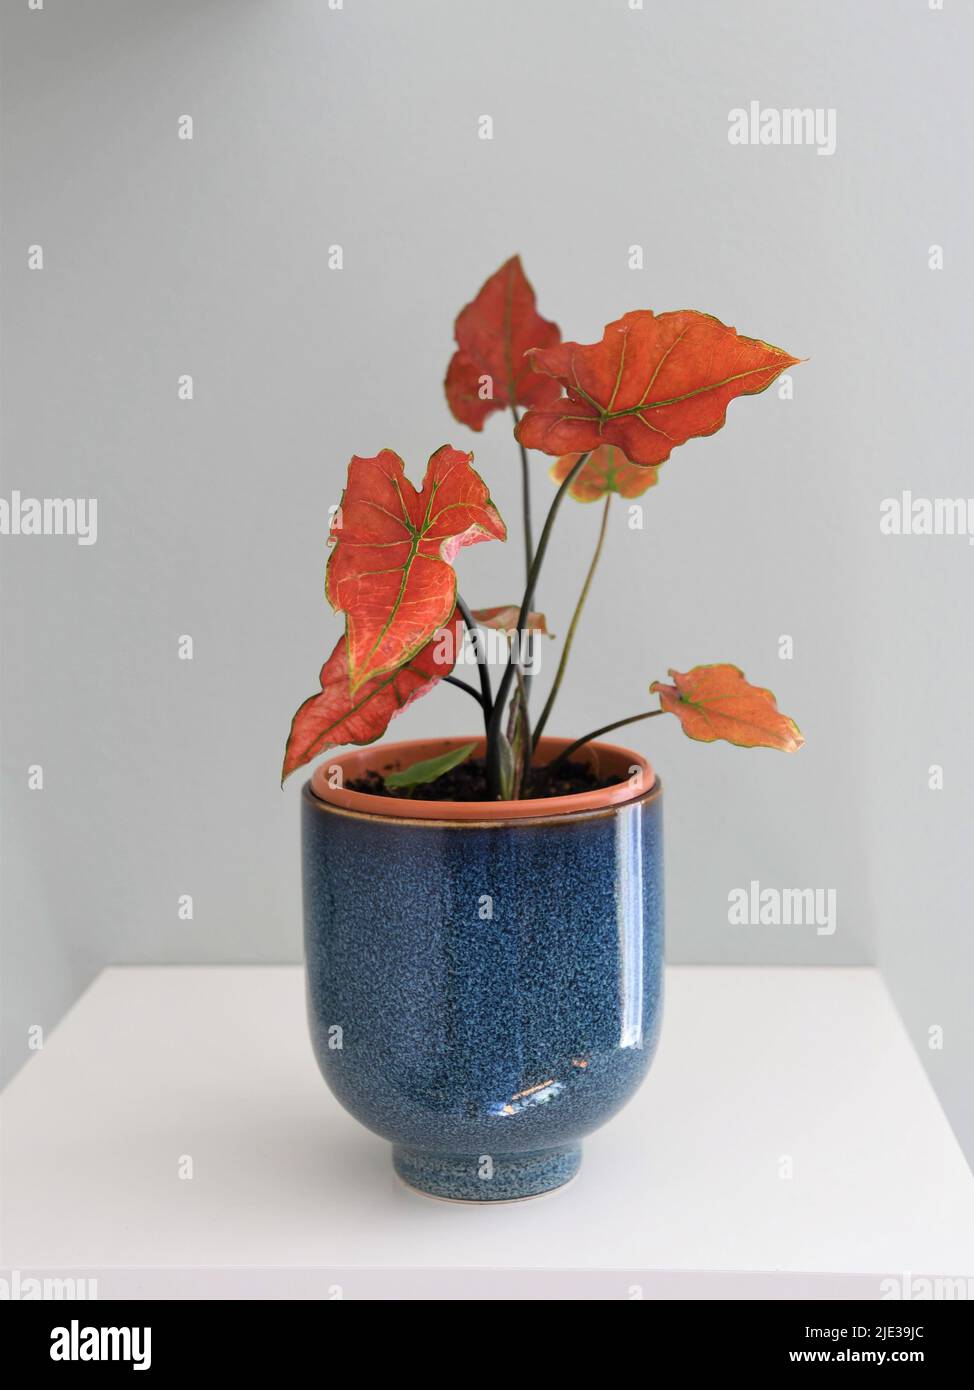 Caladium red flame on a white shelf isolated against a gray background. The leaves are red with green veins and stems. The plant pot is blue ceramic. Stock Photo